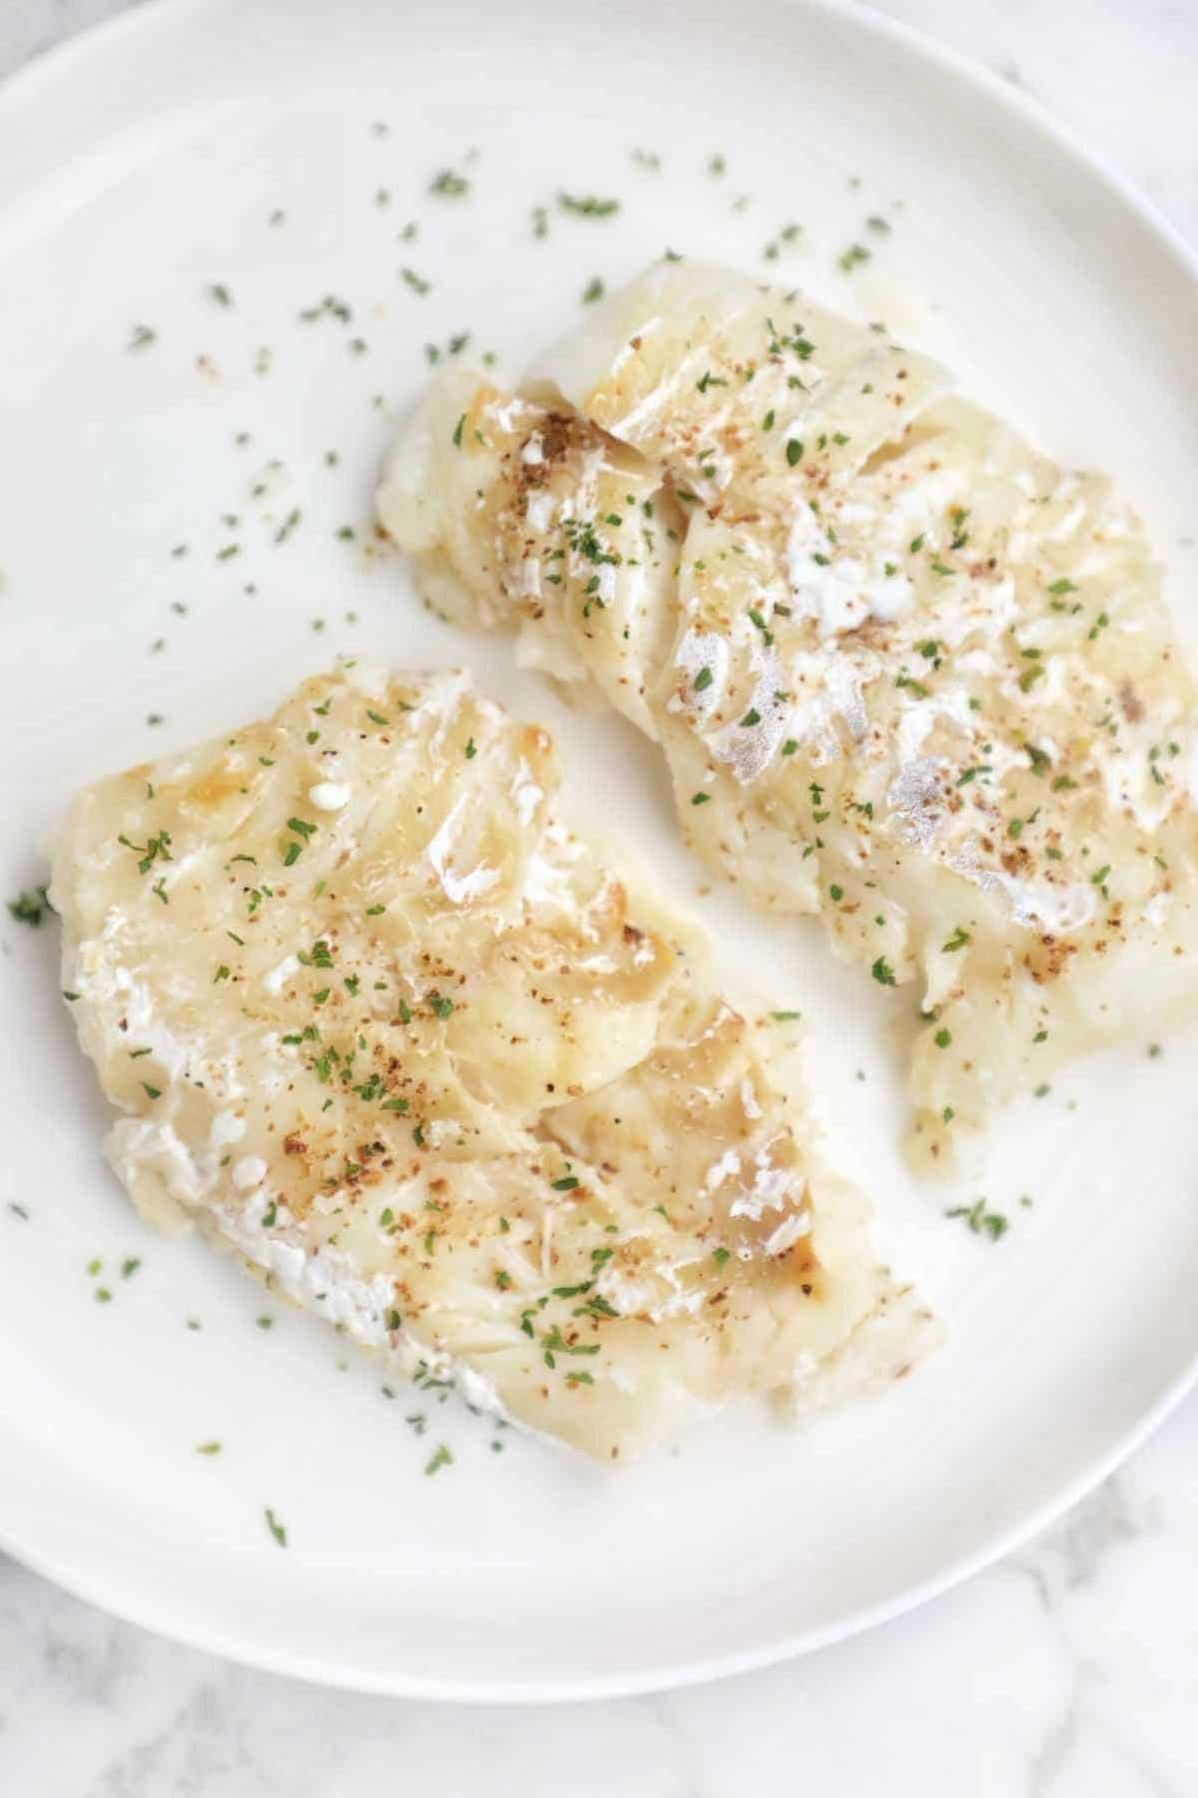  Your taste buds won't believe that this fish was cooked straight from the freezer.